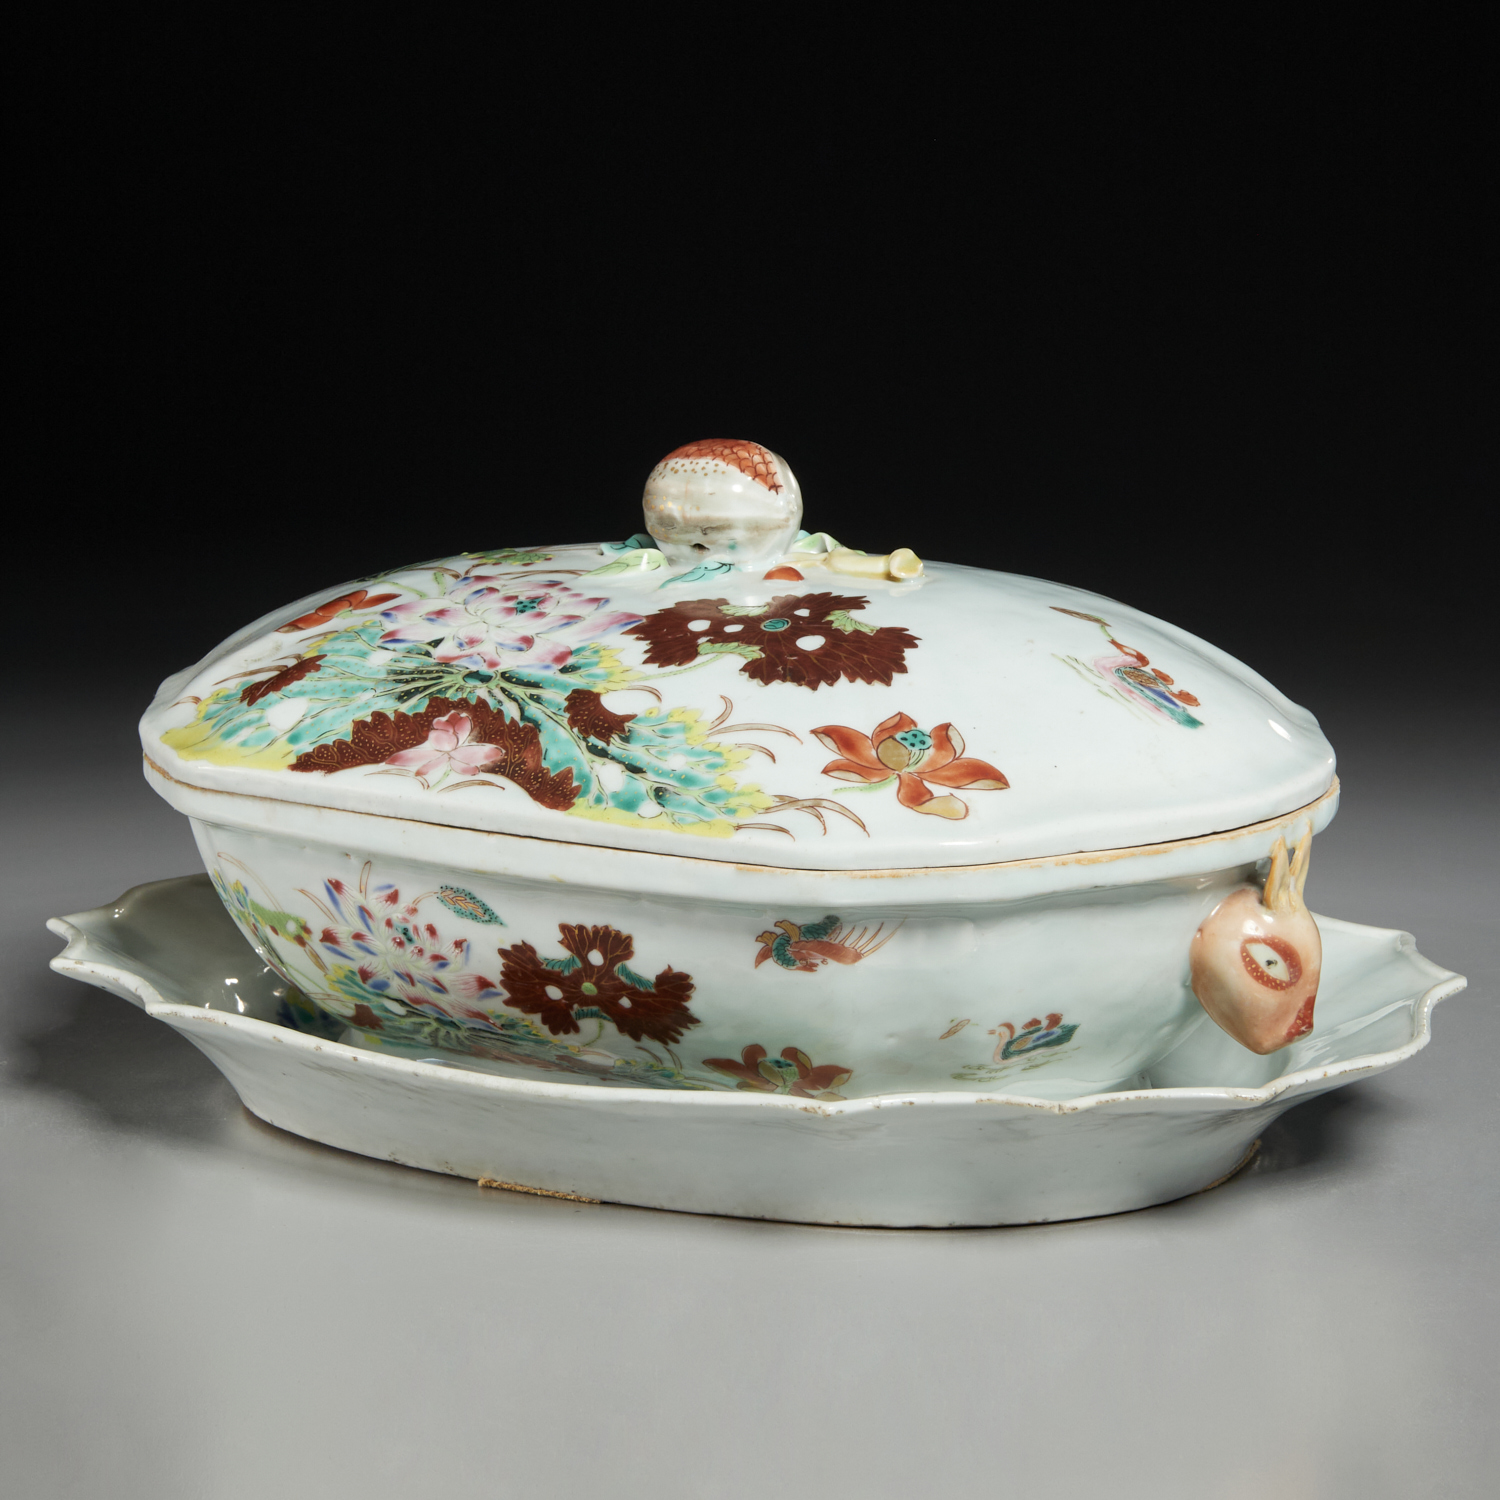 UNUSUAL CHINESE EXPORT TUREEN AND